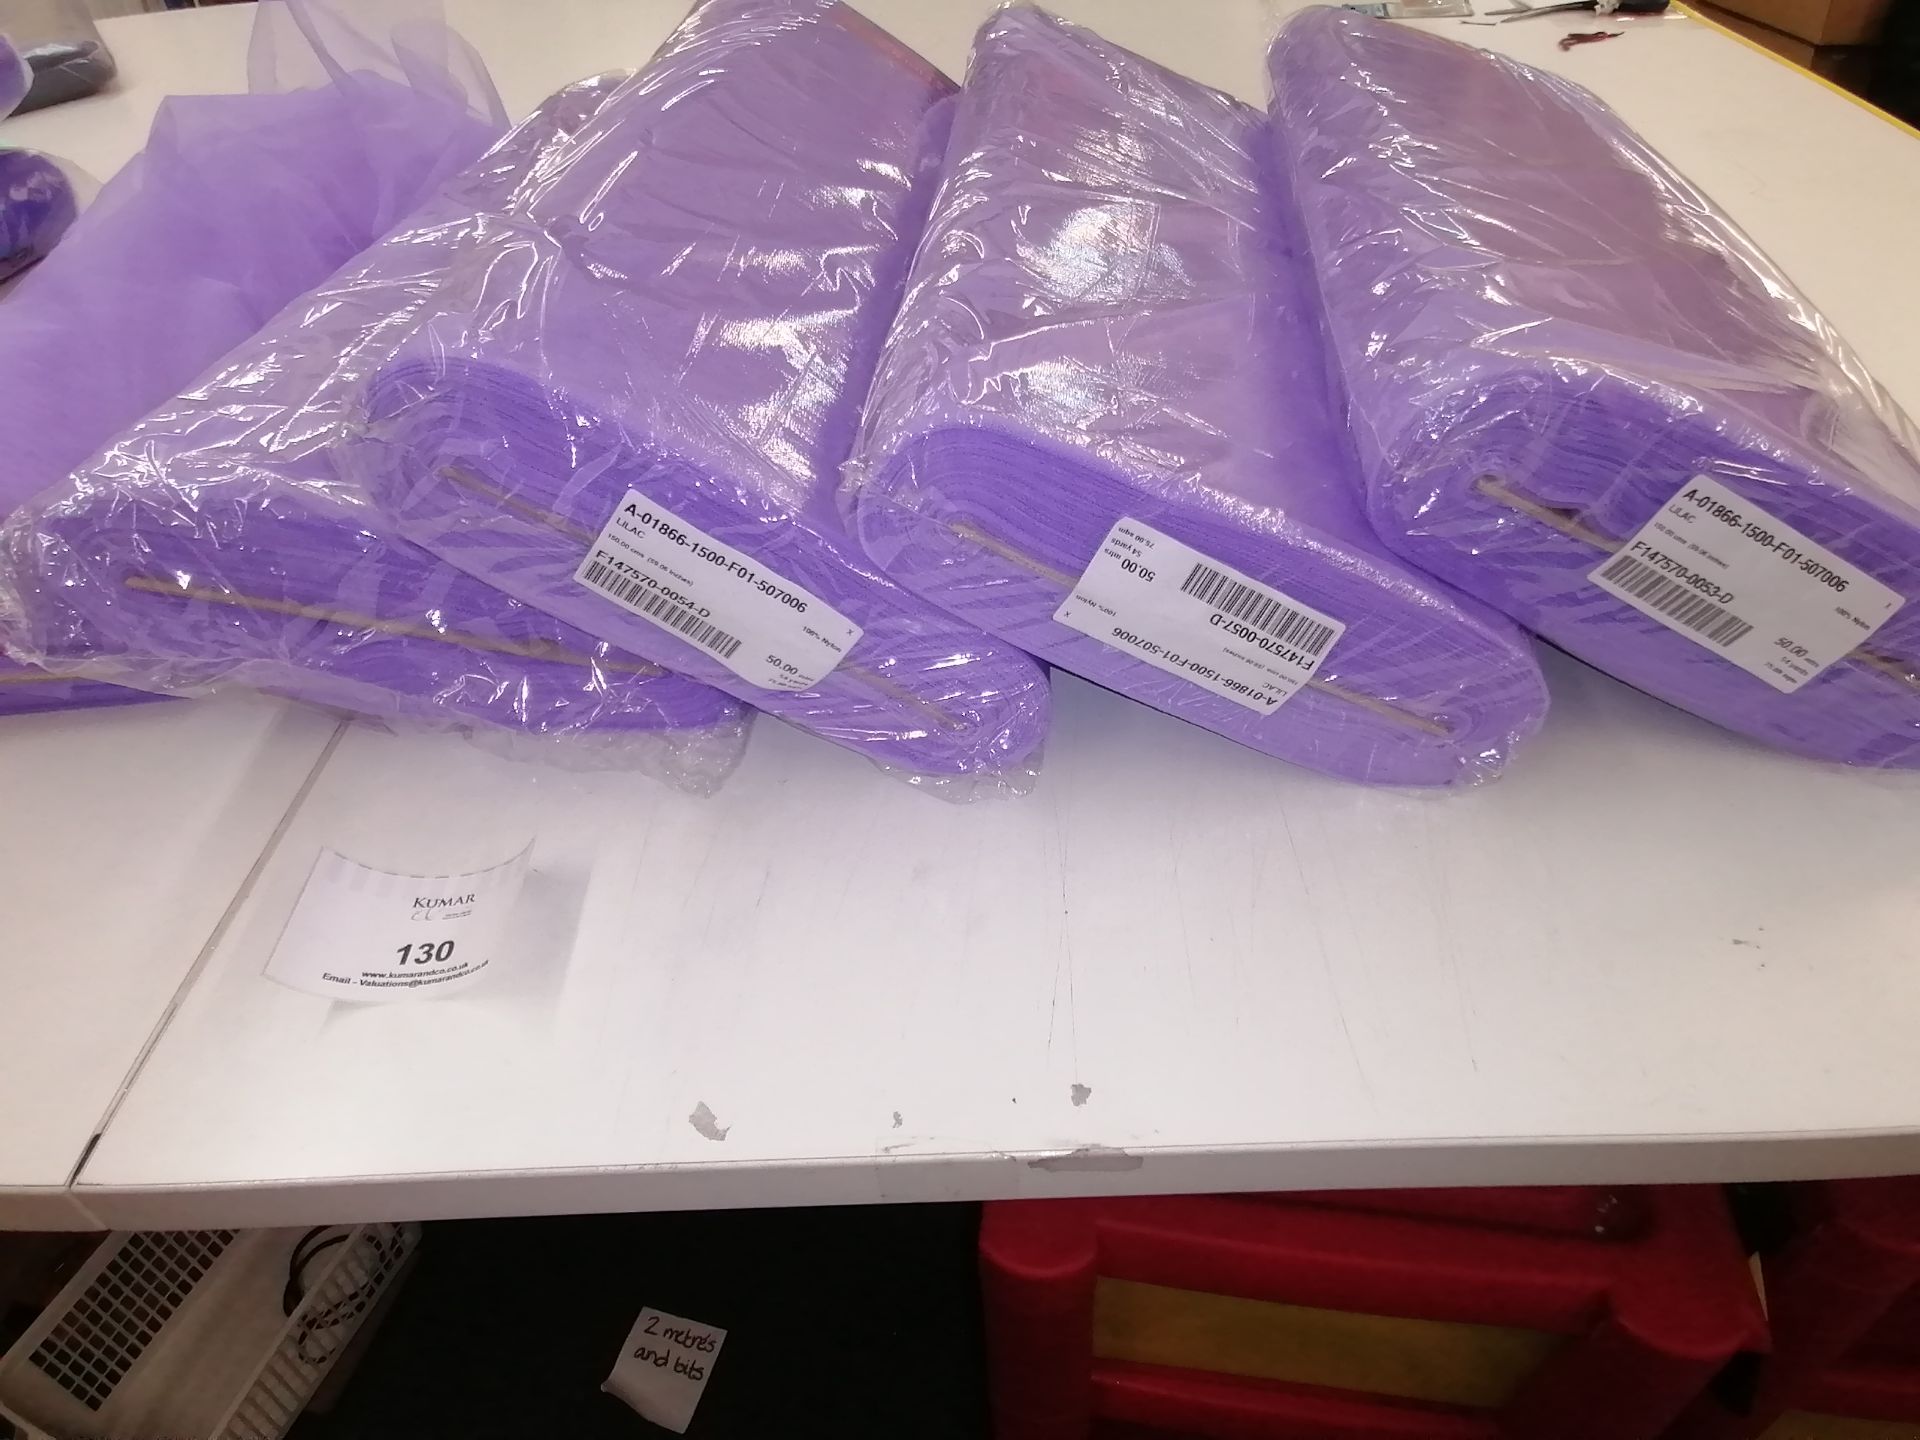 4 x New lilac netting fabric . Width 150cm Estimated 200+ linear meters - Image 2 of 4